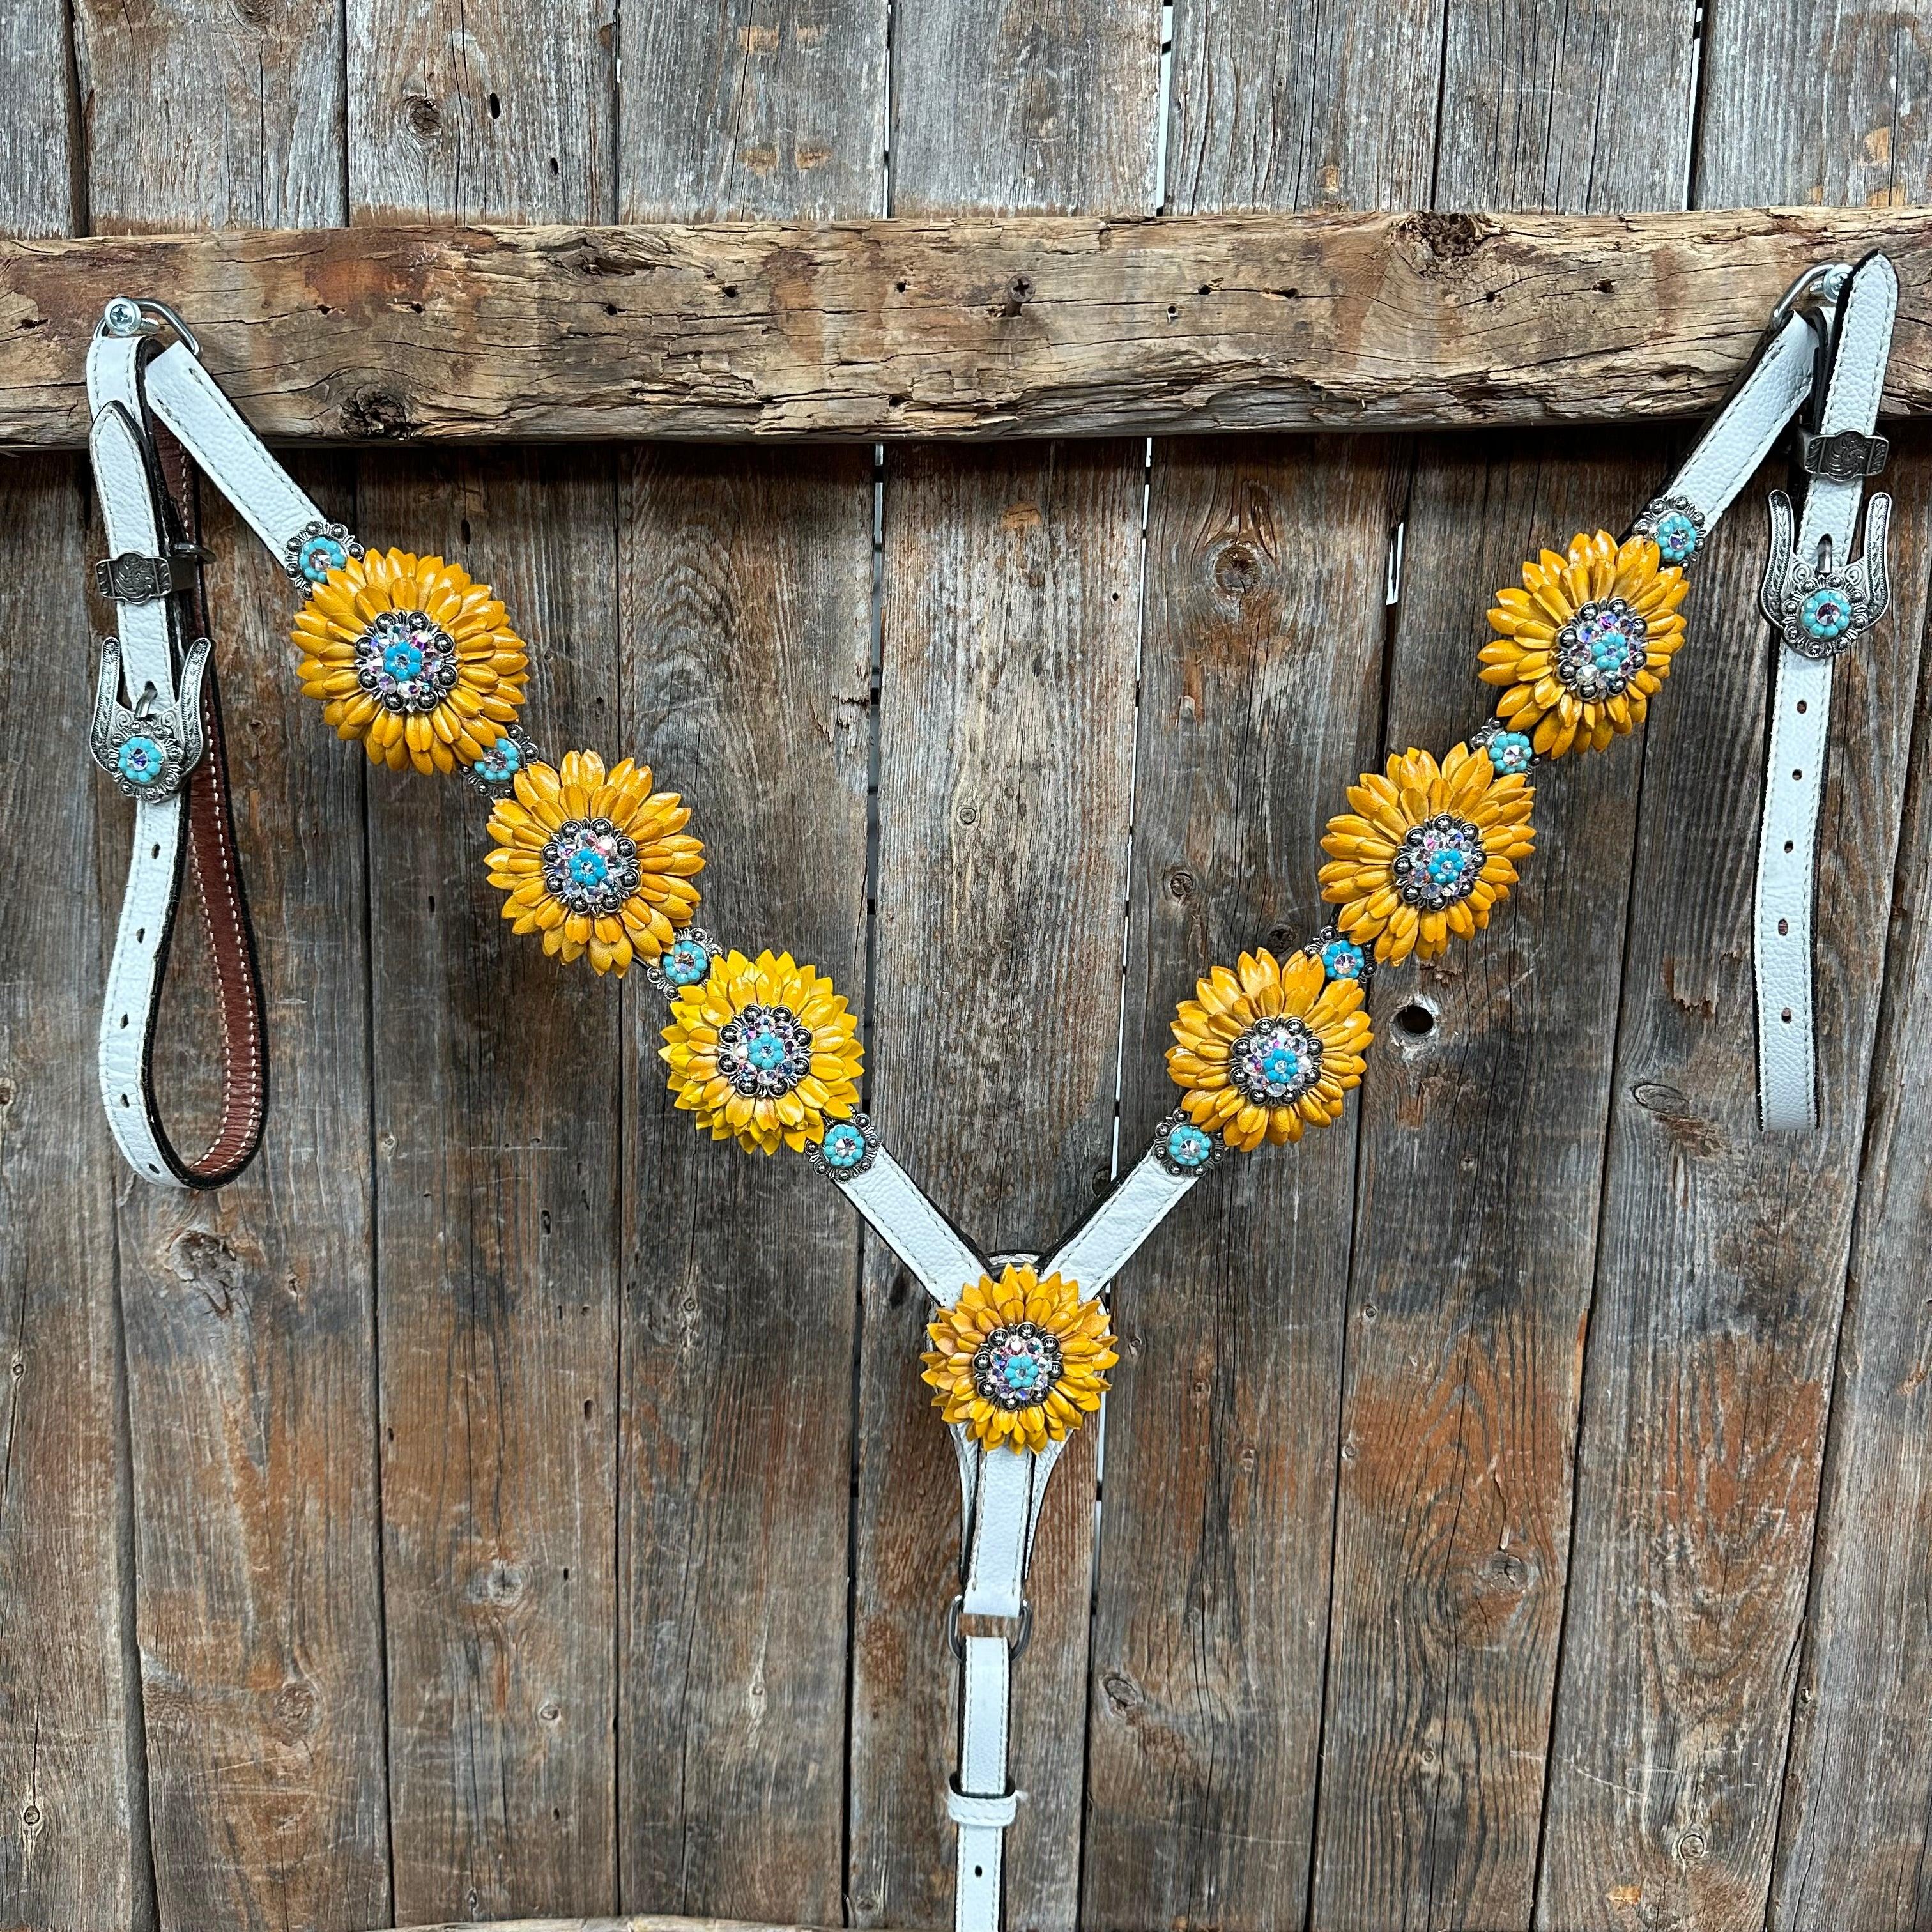 White Leather Turquoise Sunflower One Ear/ Breastcollar #OEBC551 - RODEO DRIVE